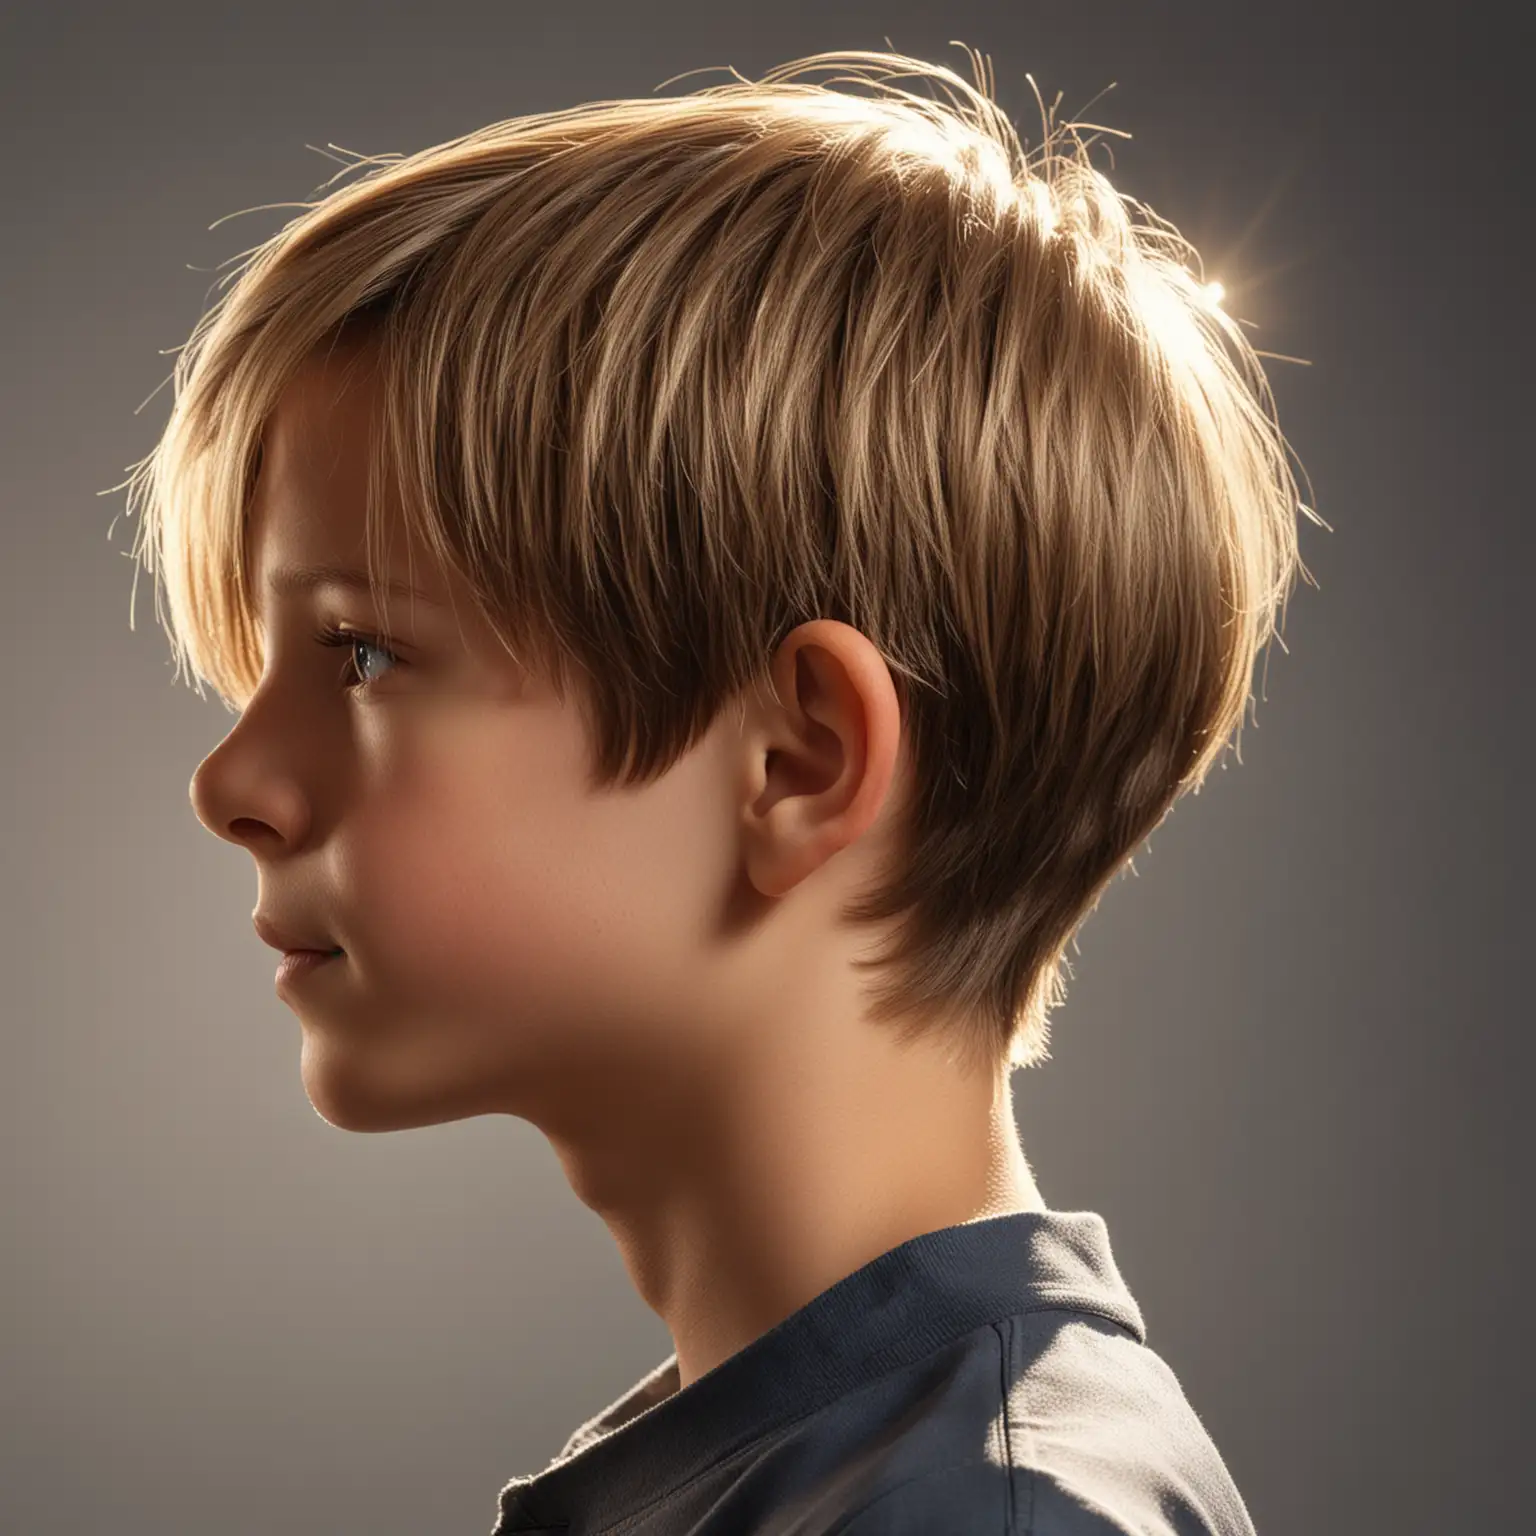 Hyper realistic photo of twelve year old boy, smooth, shiny hair, profile view, sunlight